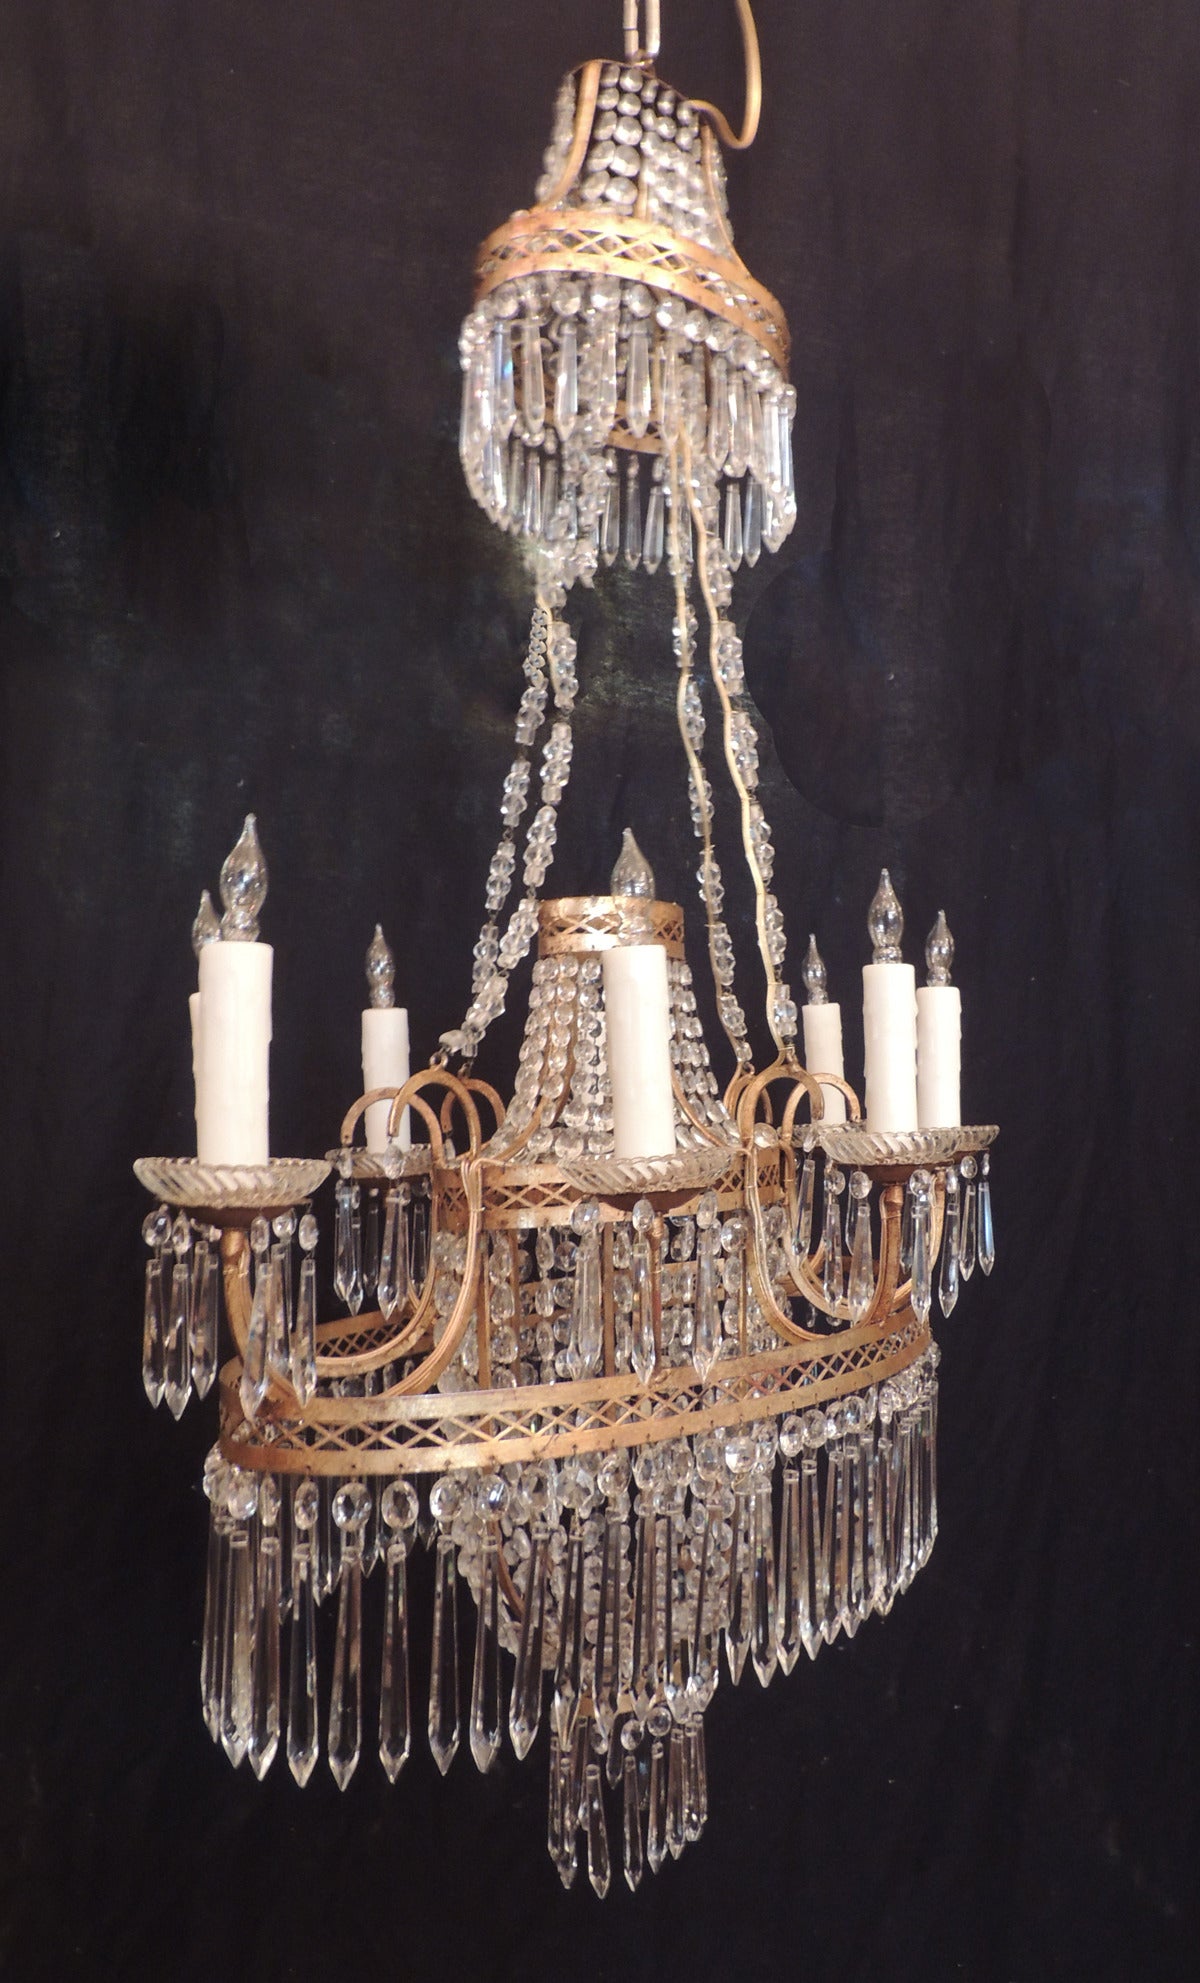 This unique chandelier was made in Italy during the first half of the 19th century and is a rare elliptical shape.  This piece features an urn-shaped middle section made of etched and pierced tole borders with crystal beading surrounded by a larger